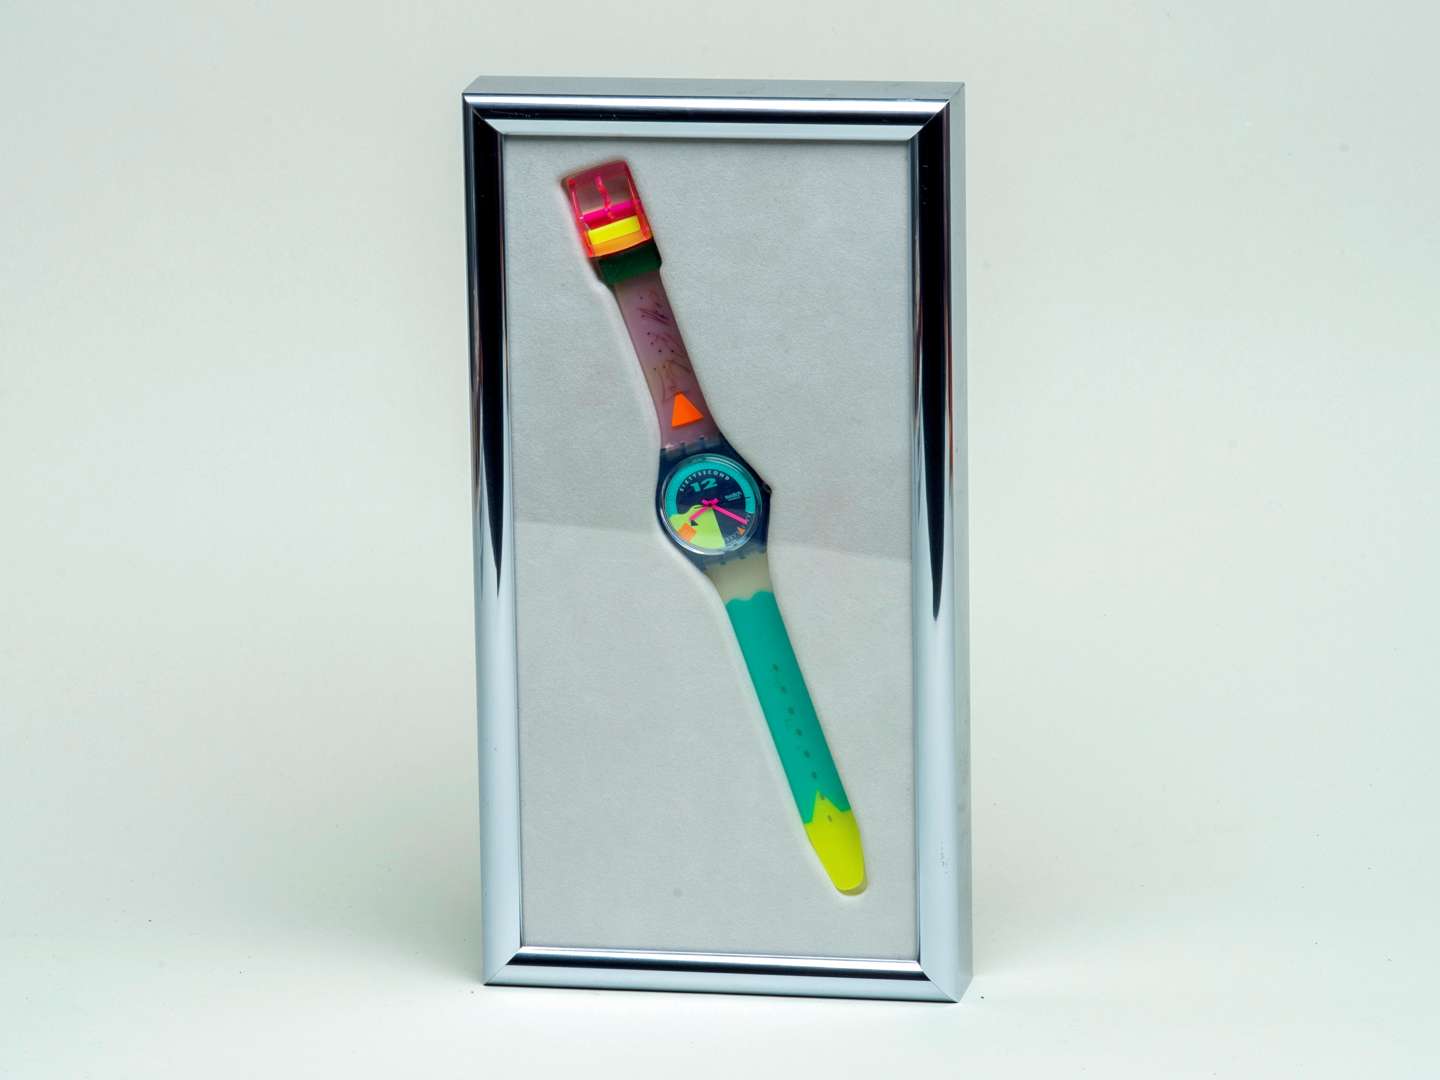 <p>"Nose Wheely" framed “Cliff Richard” signed Swatch watch</p>